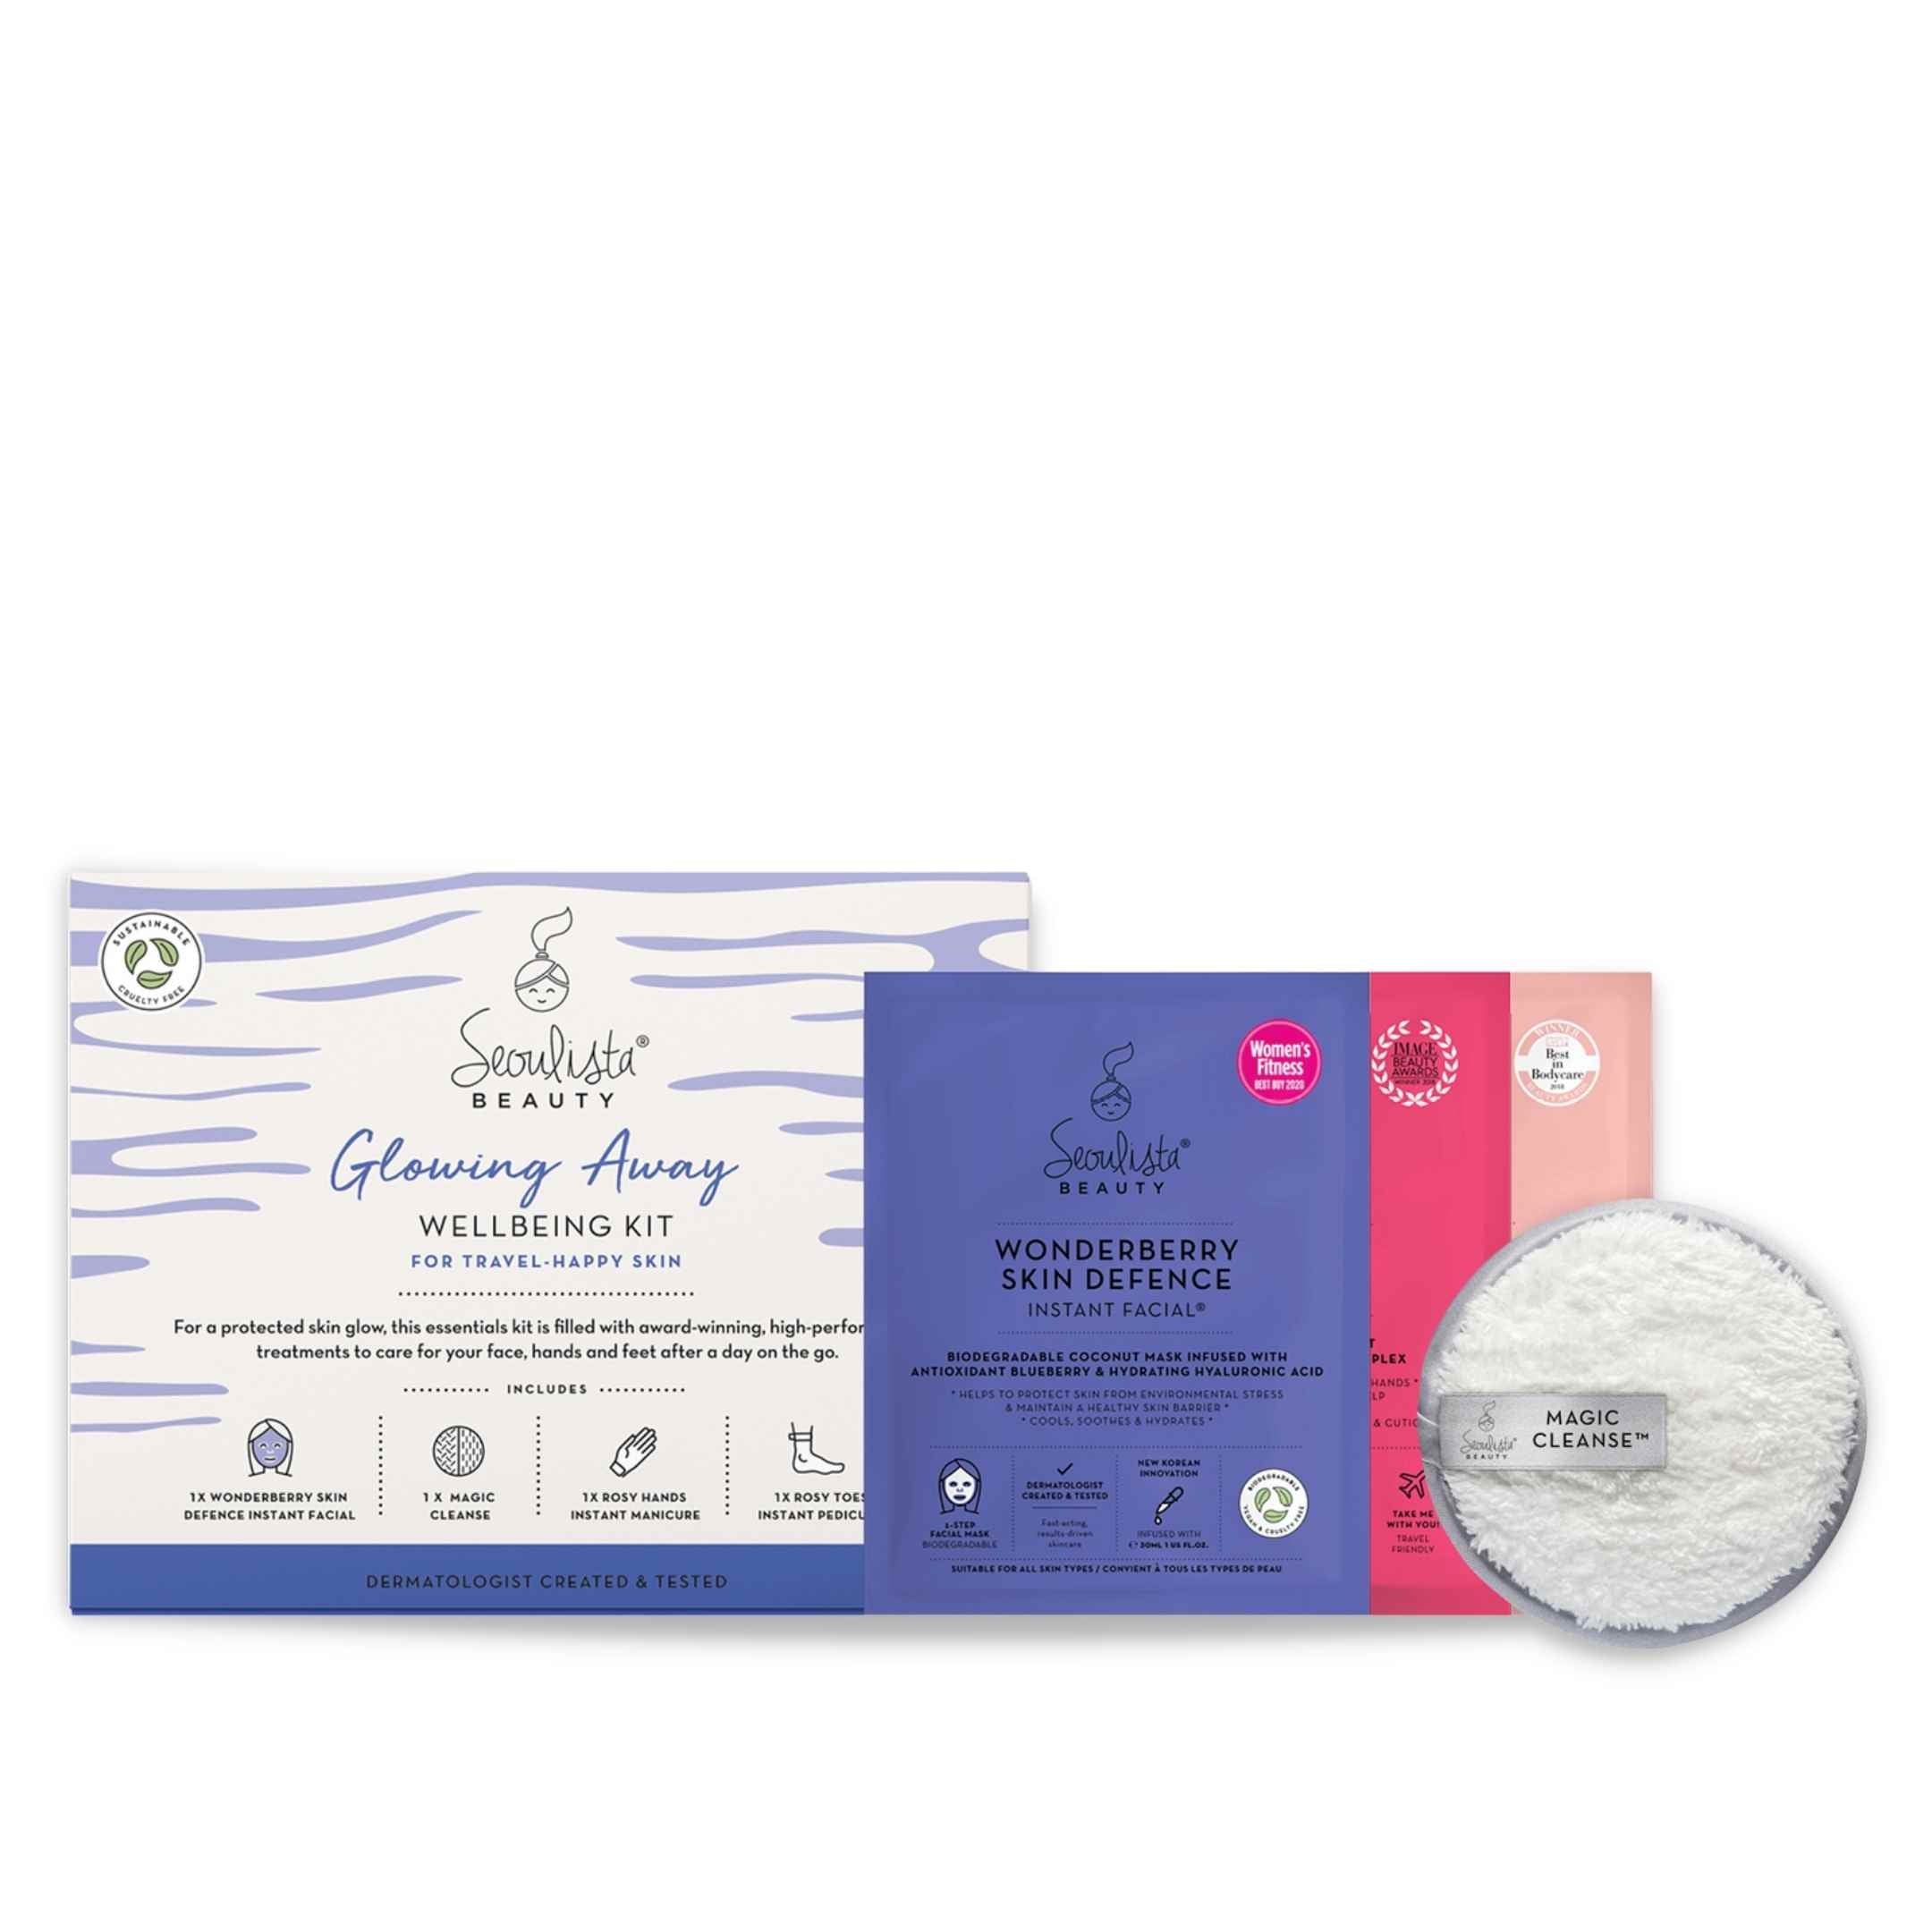 Seoulista Glowing Away Well Being Kit